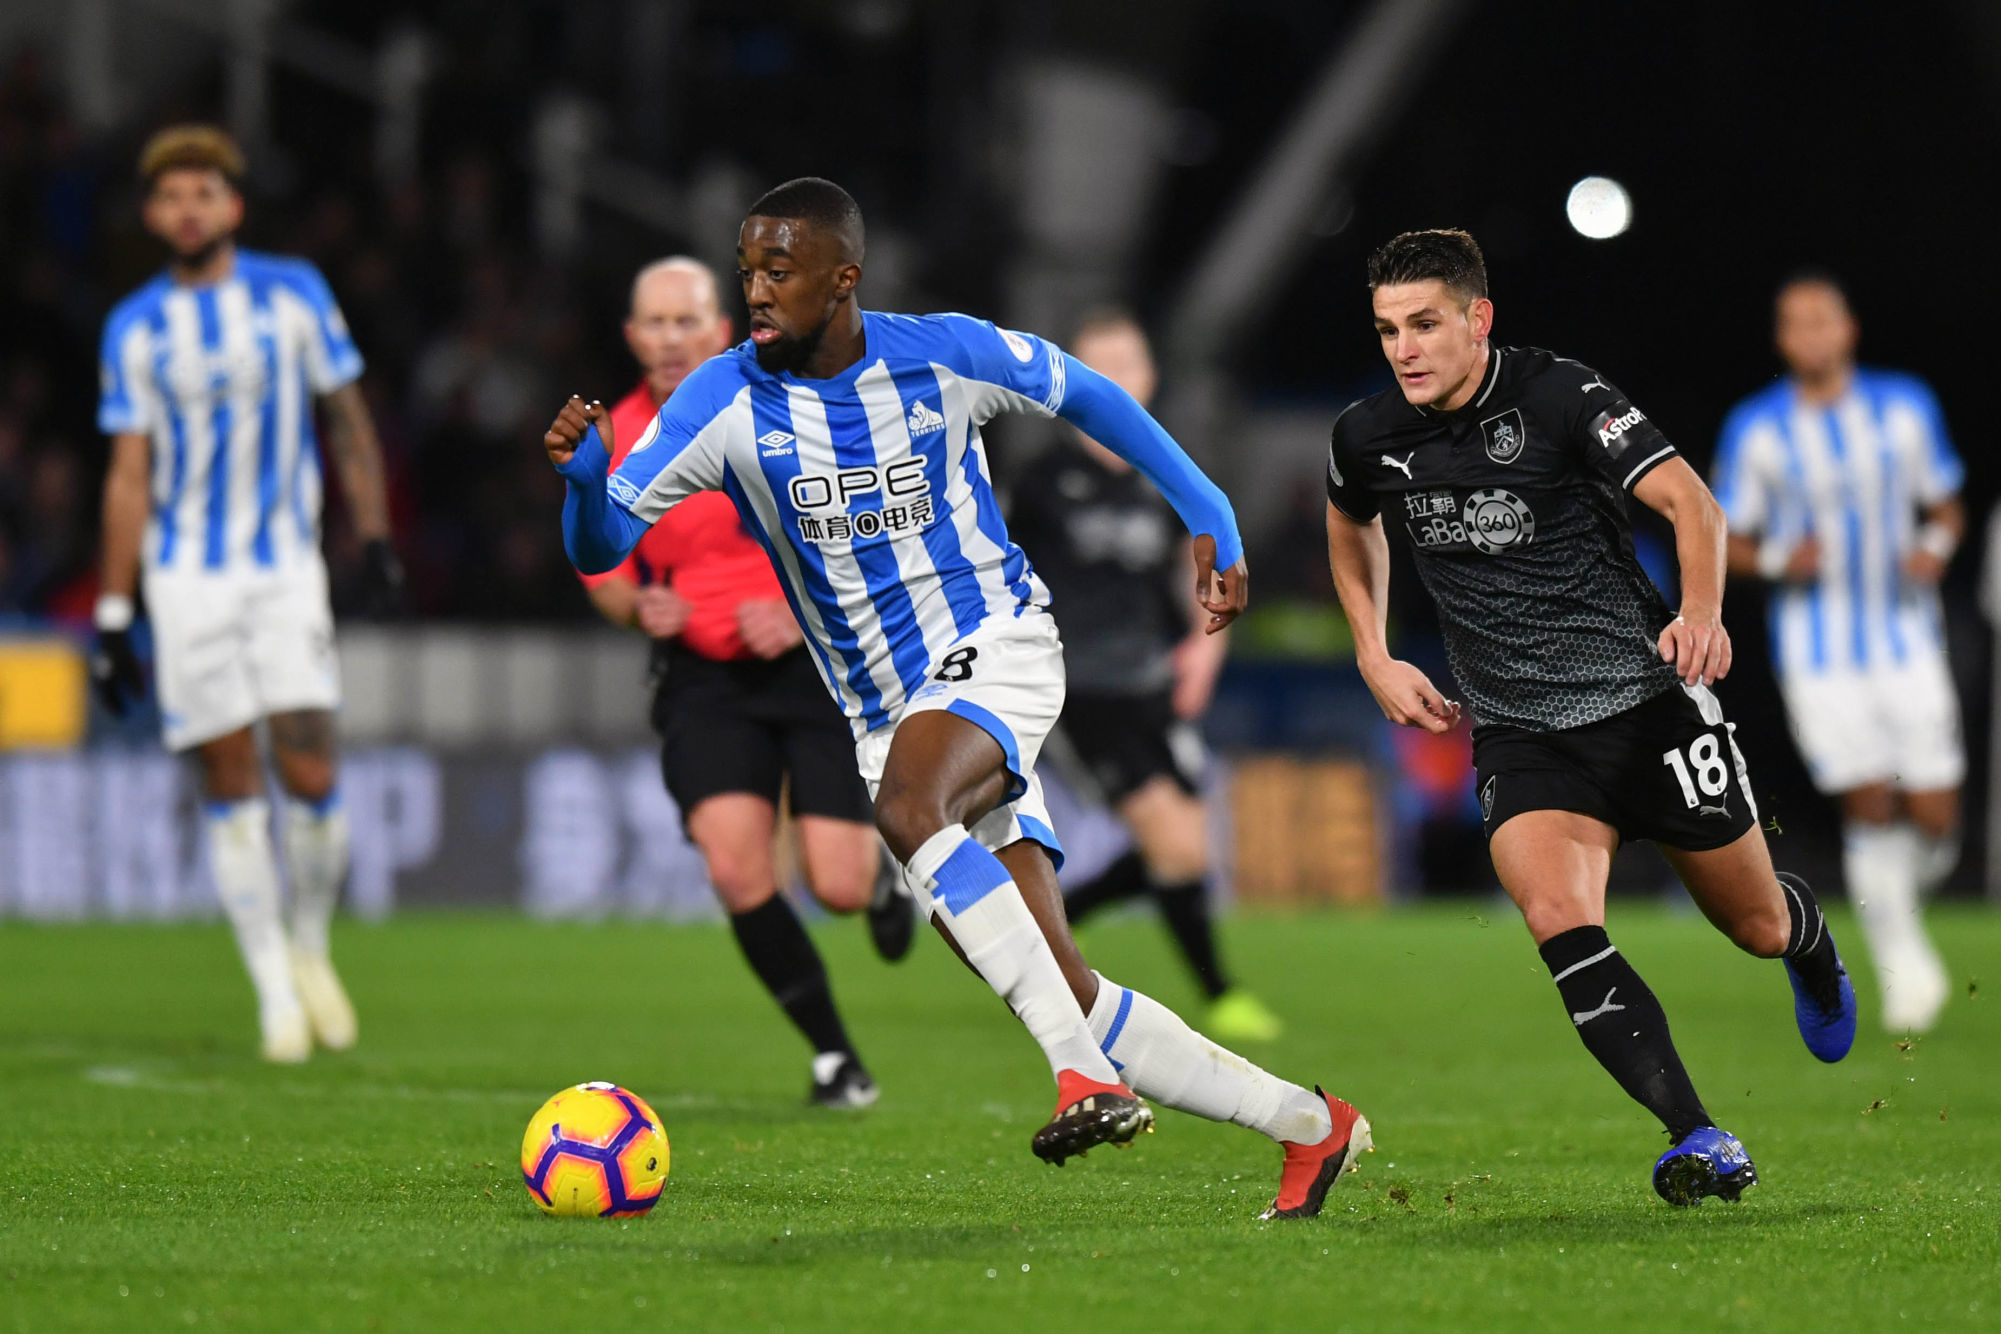 Huddersfield Town's Isaac Mbenza in action